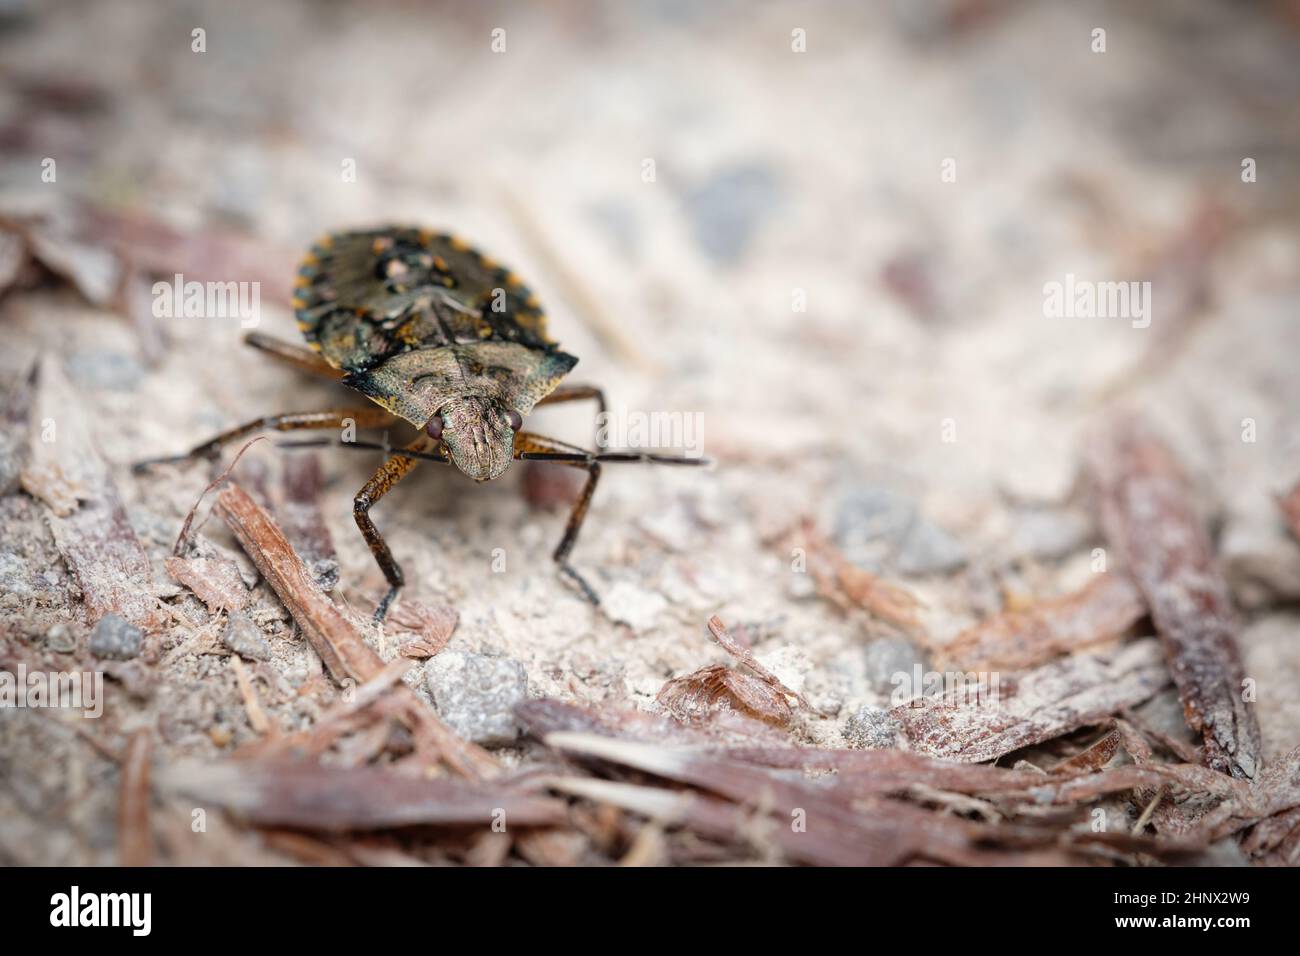 Shield bug insect animal close-up Stock Photo